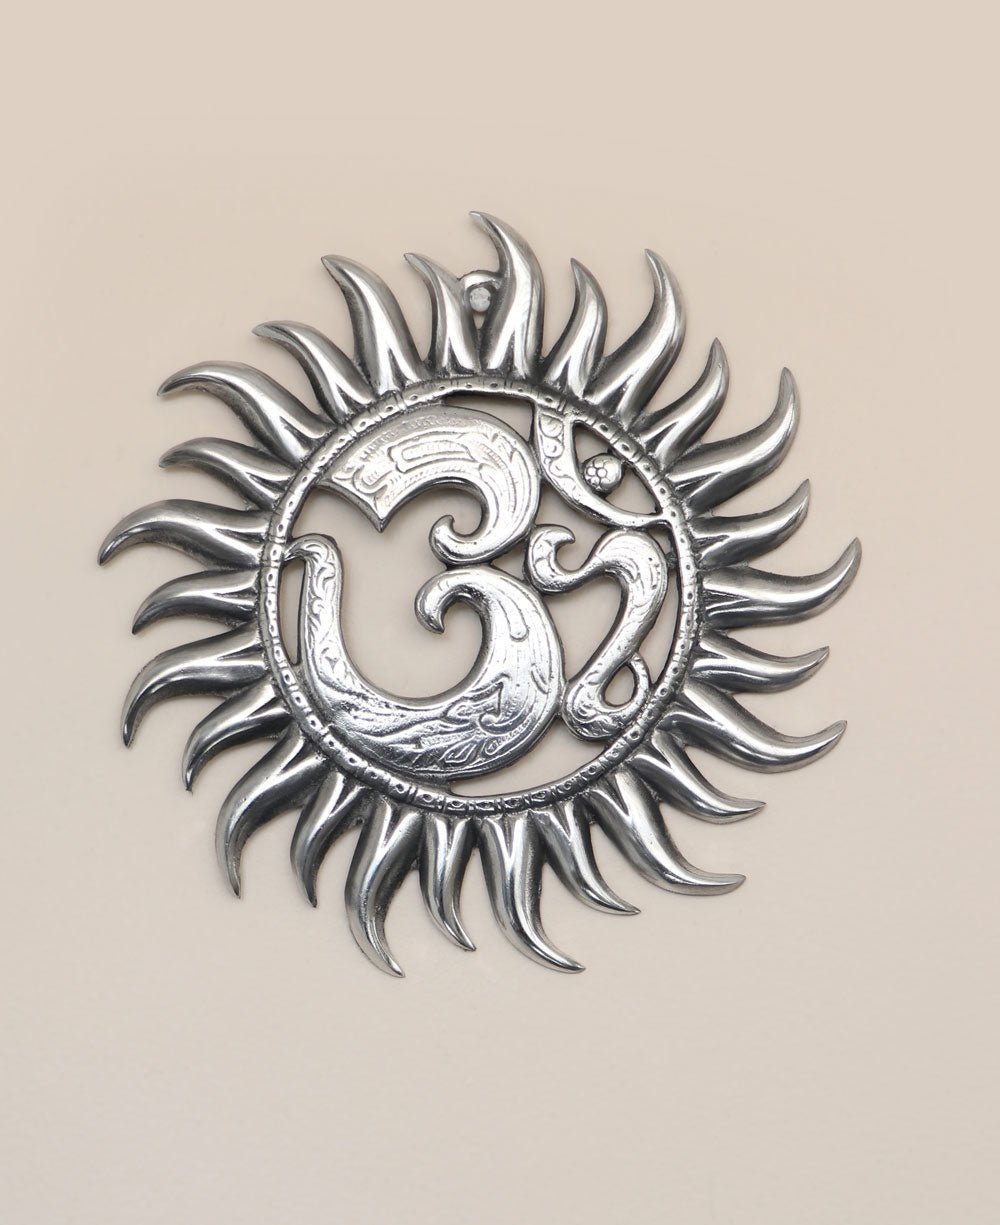 Om Sun Wall Hanging with Silver Colored Finish - Wind Chimes